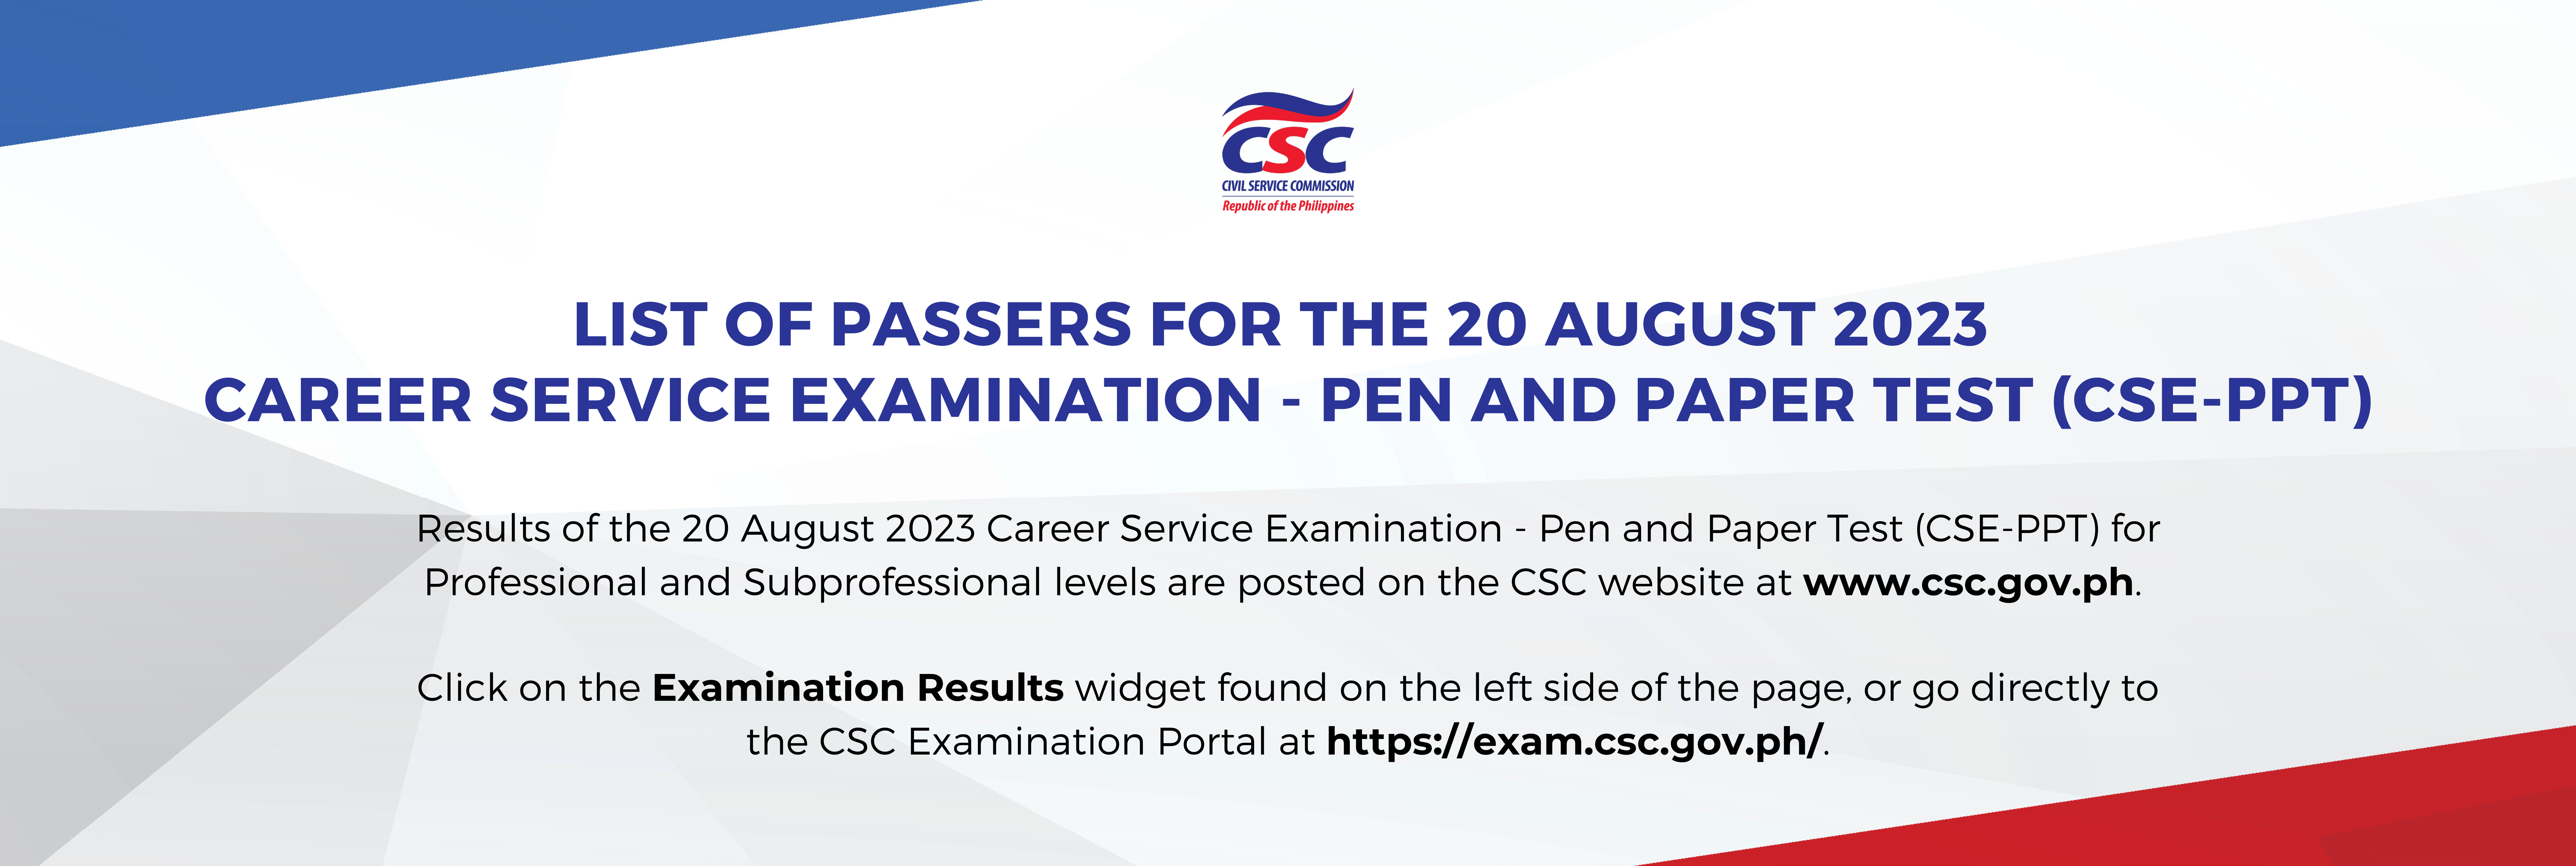 List of Passers for the 20 August 2023 Career Service Examination-Pen and Paper Test (CSE-PPT)